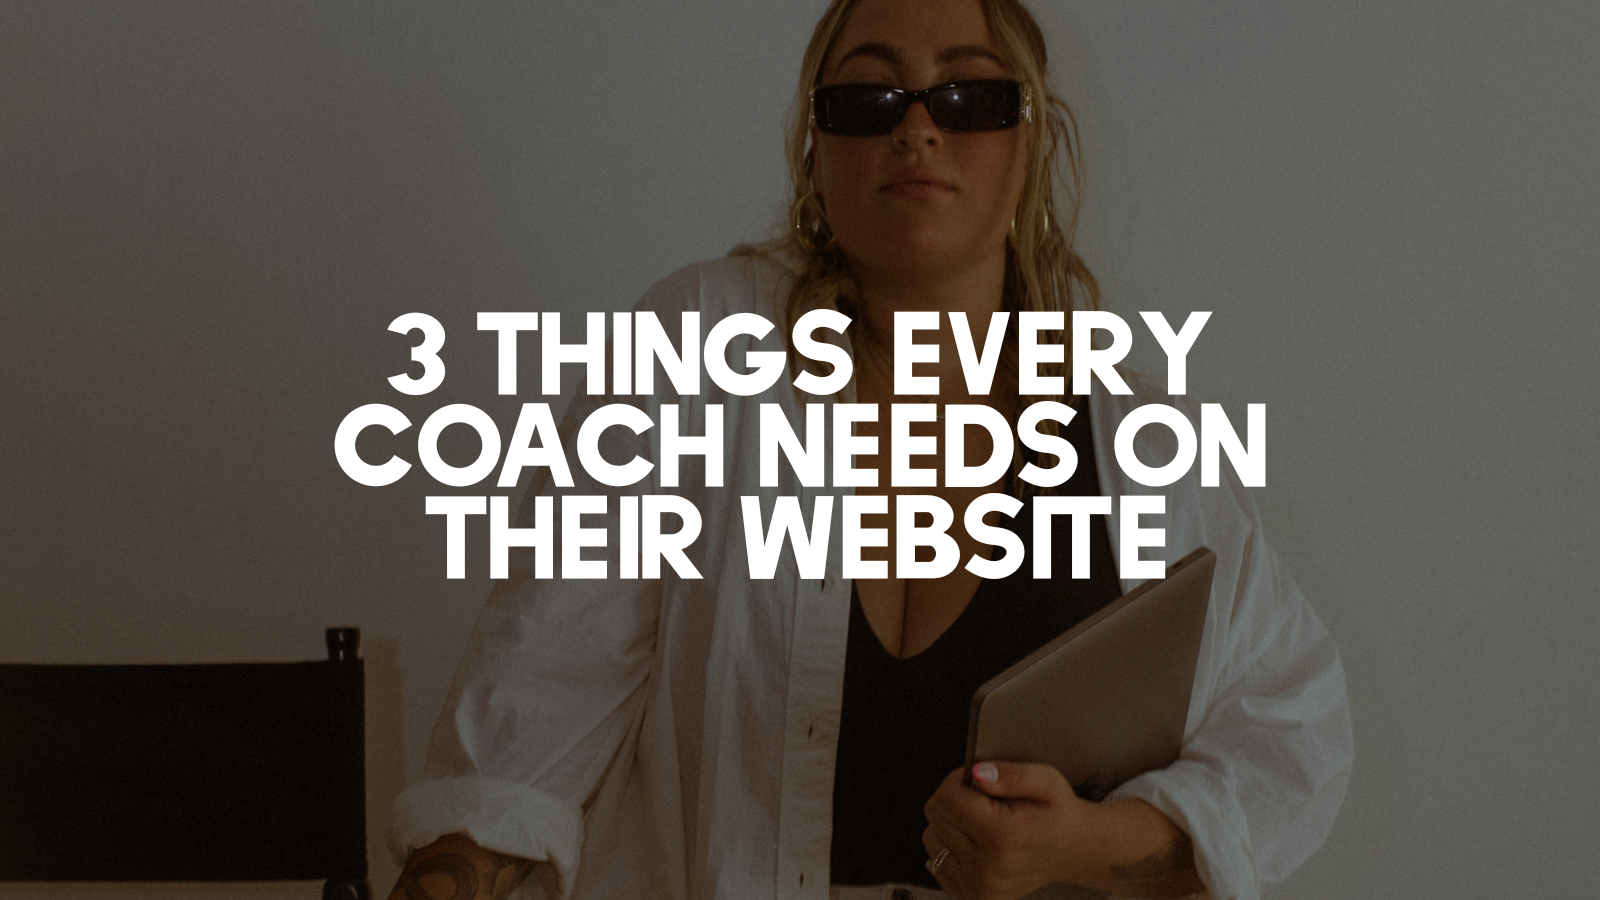 3 things every coach needs on their website